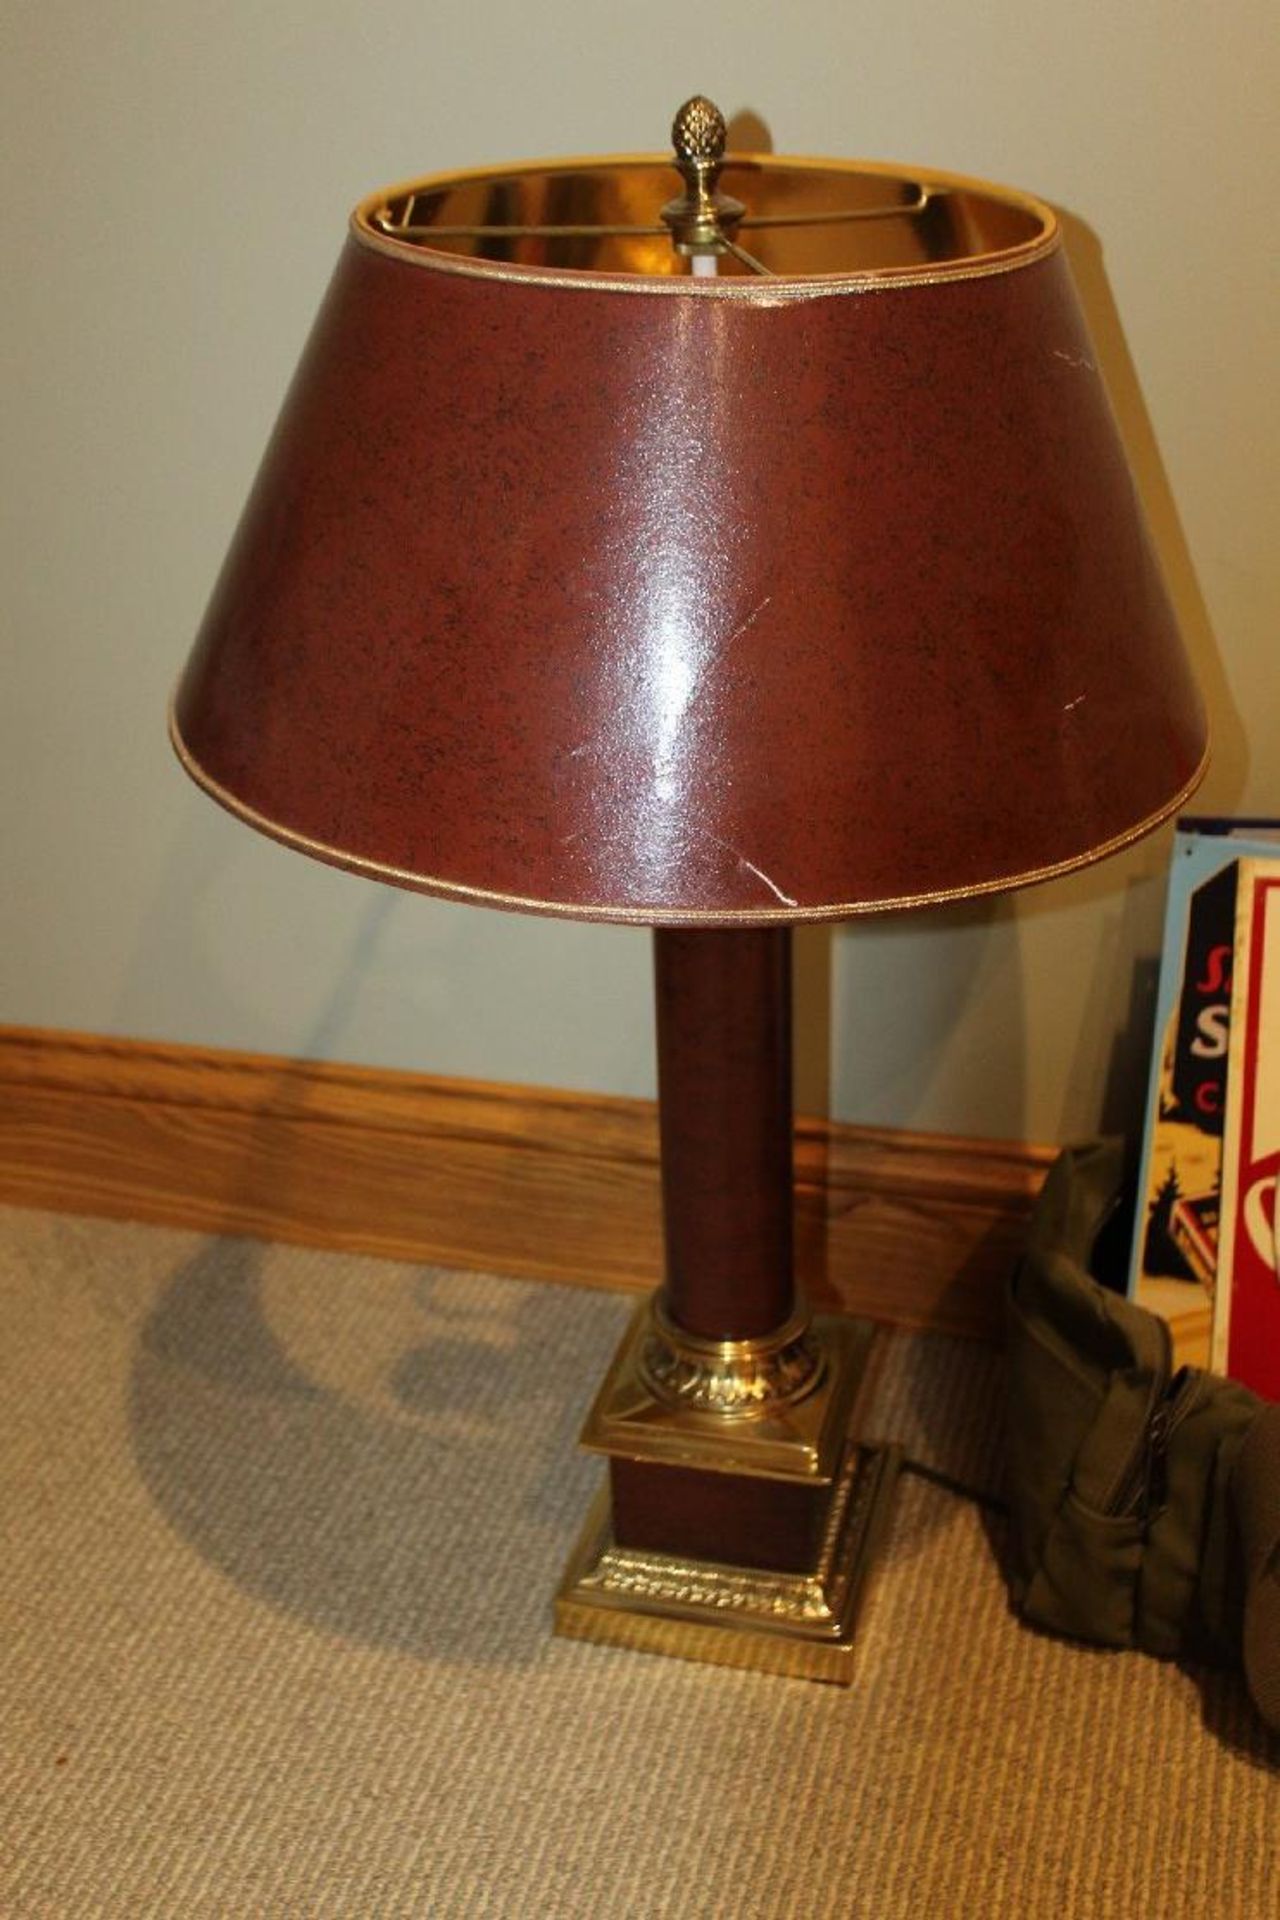 Various Items, Brass Table Lamp with Shade, Duffel Bag, Dehumidifier, Assorted Metal Signs, - Image 2 of 6